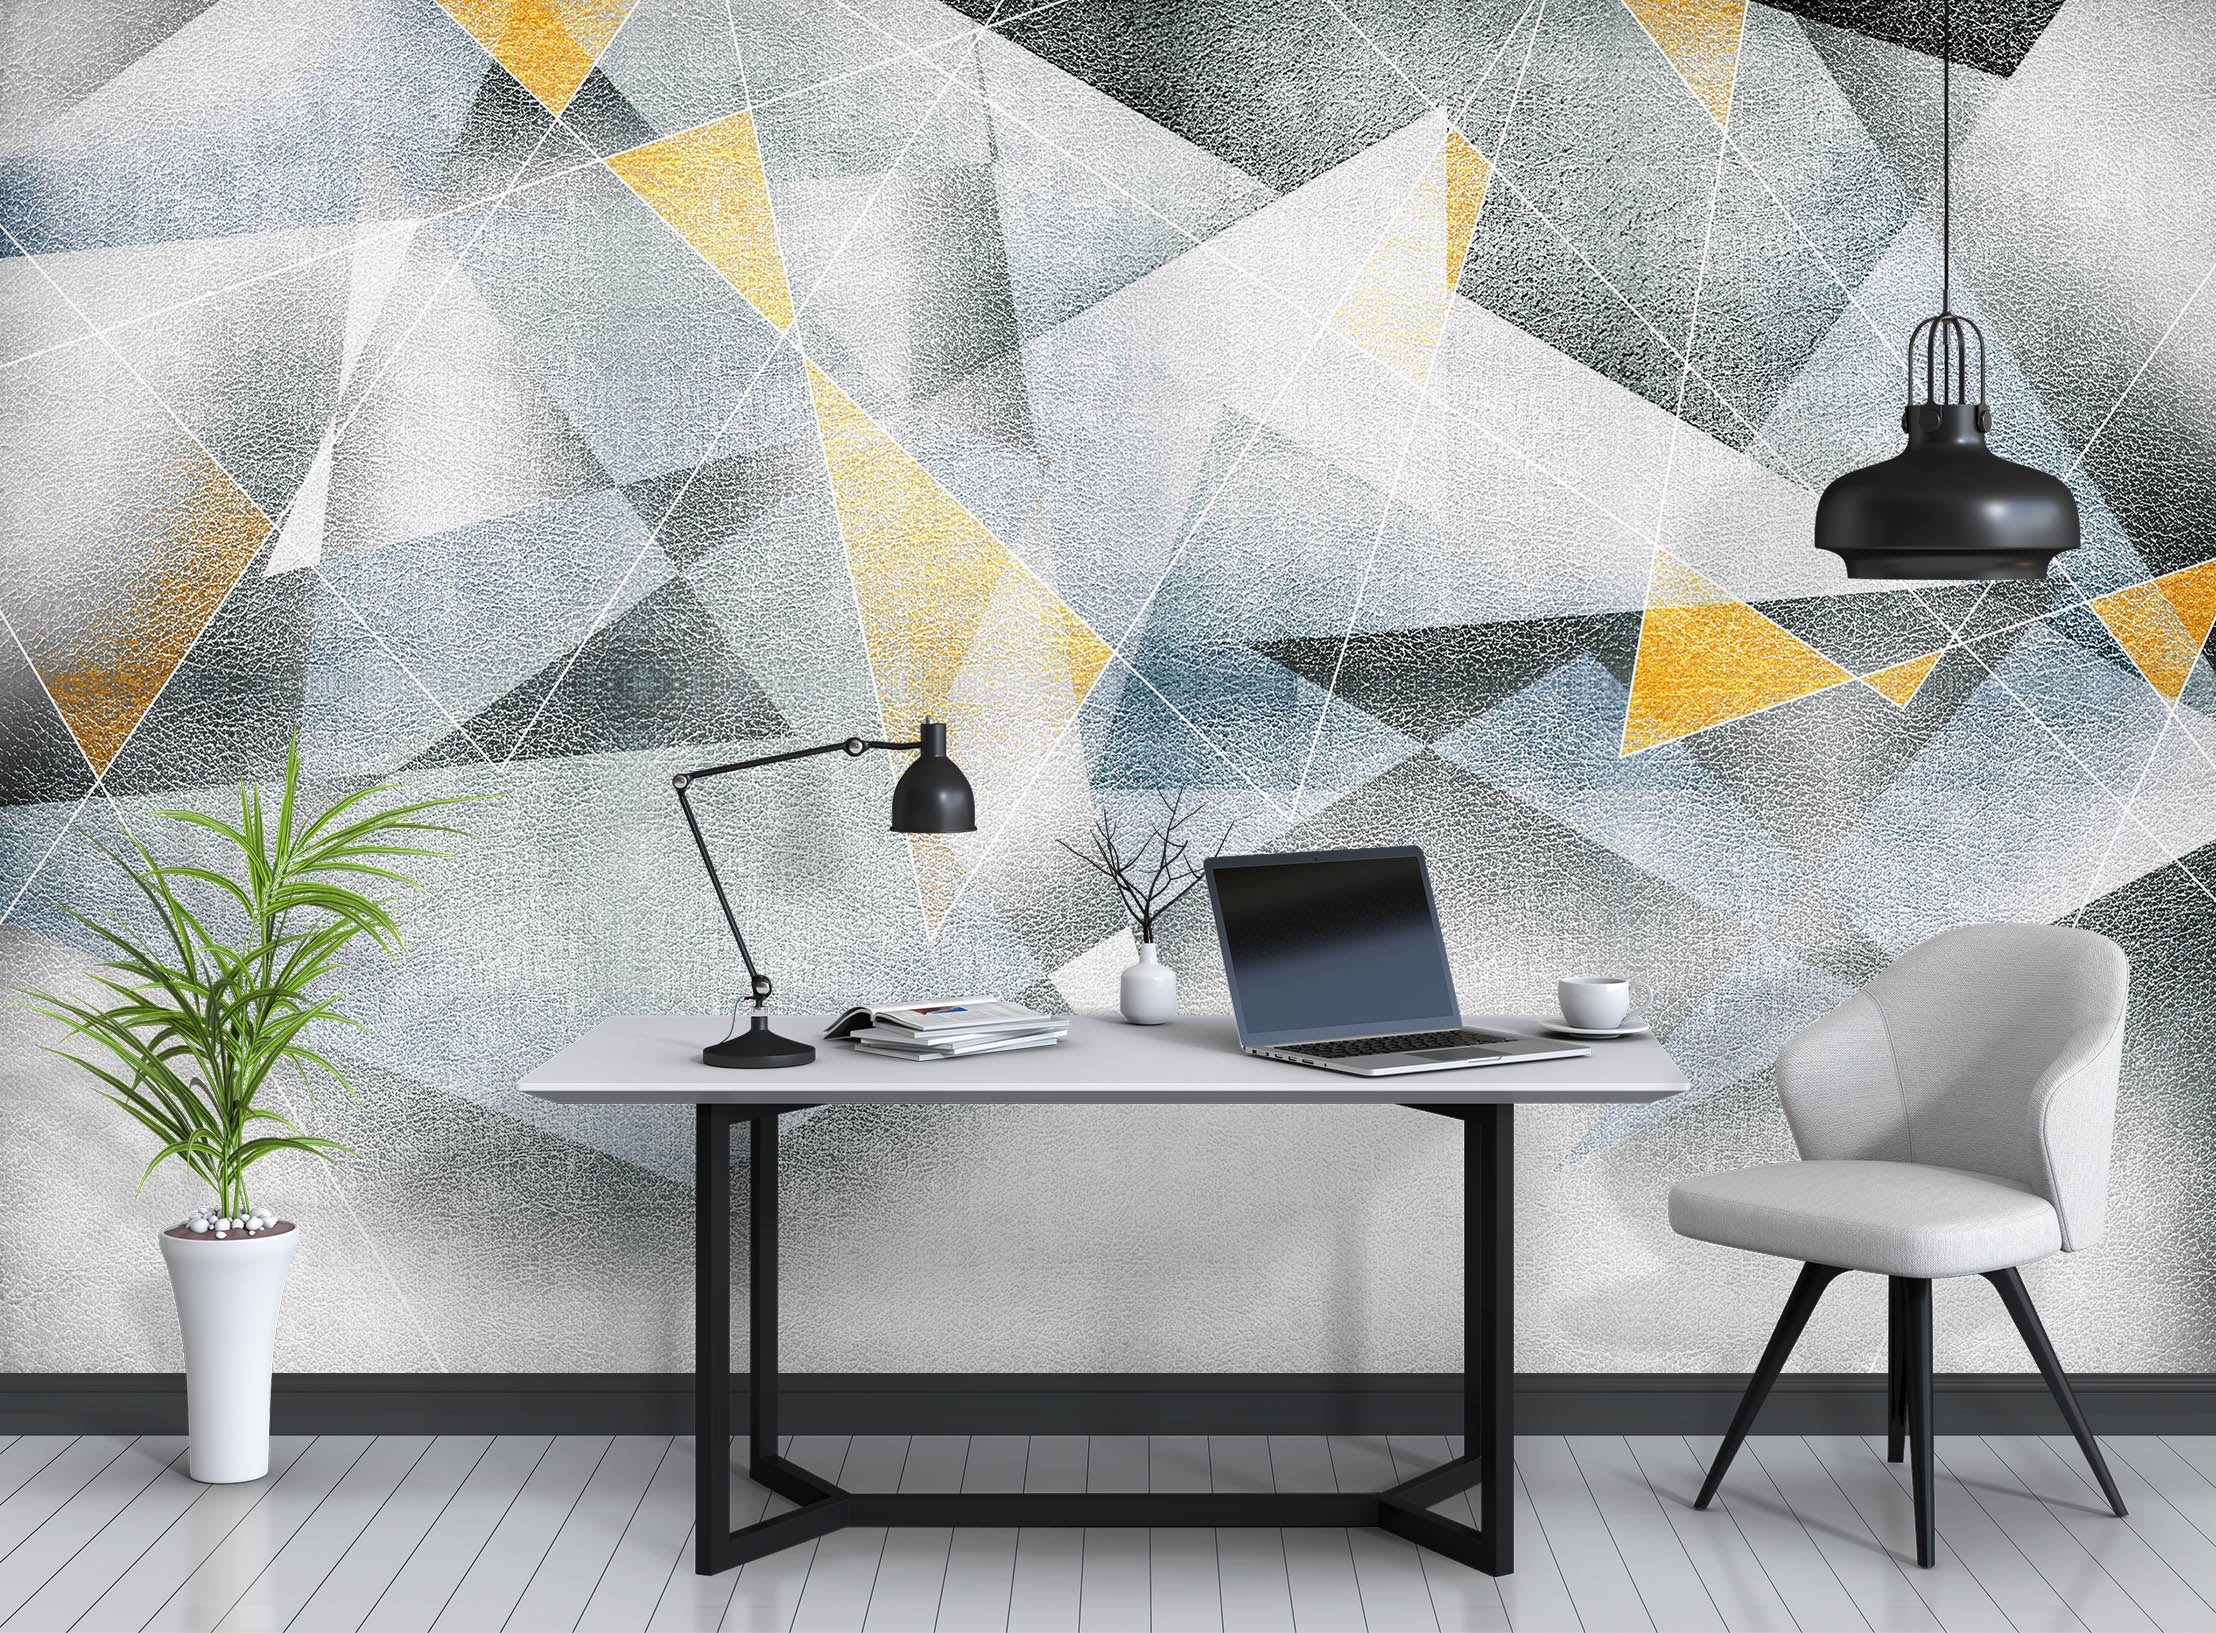 3D Yellow Triangle 1059 Wall Murals